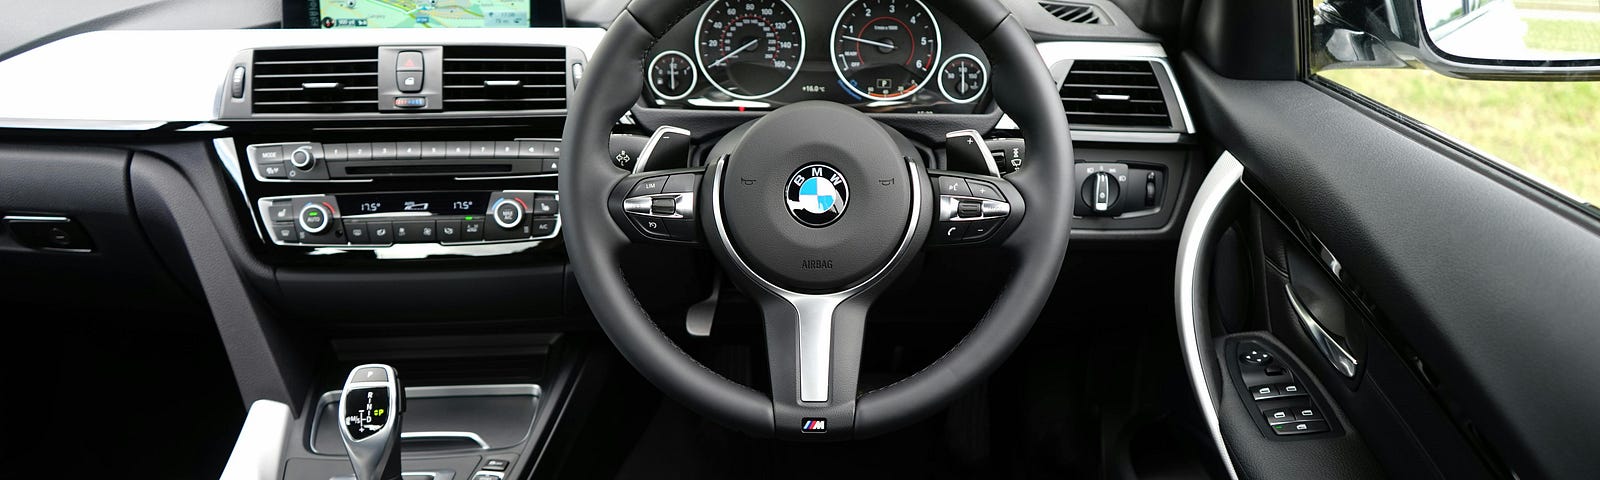 A close up of a steering wheel in a BMW.